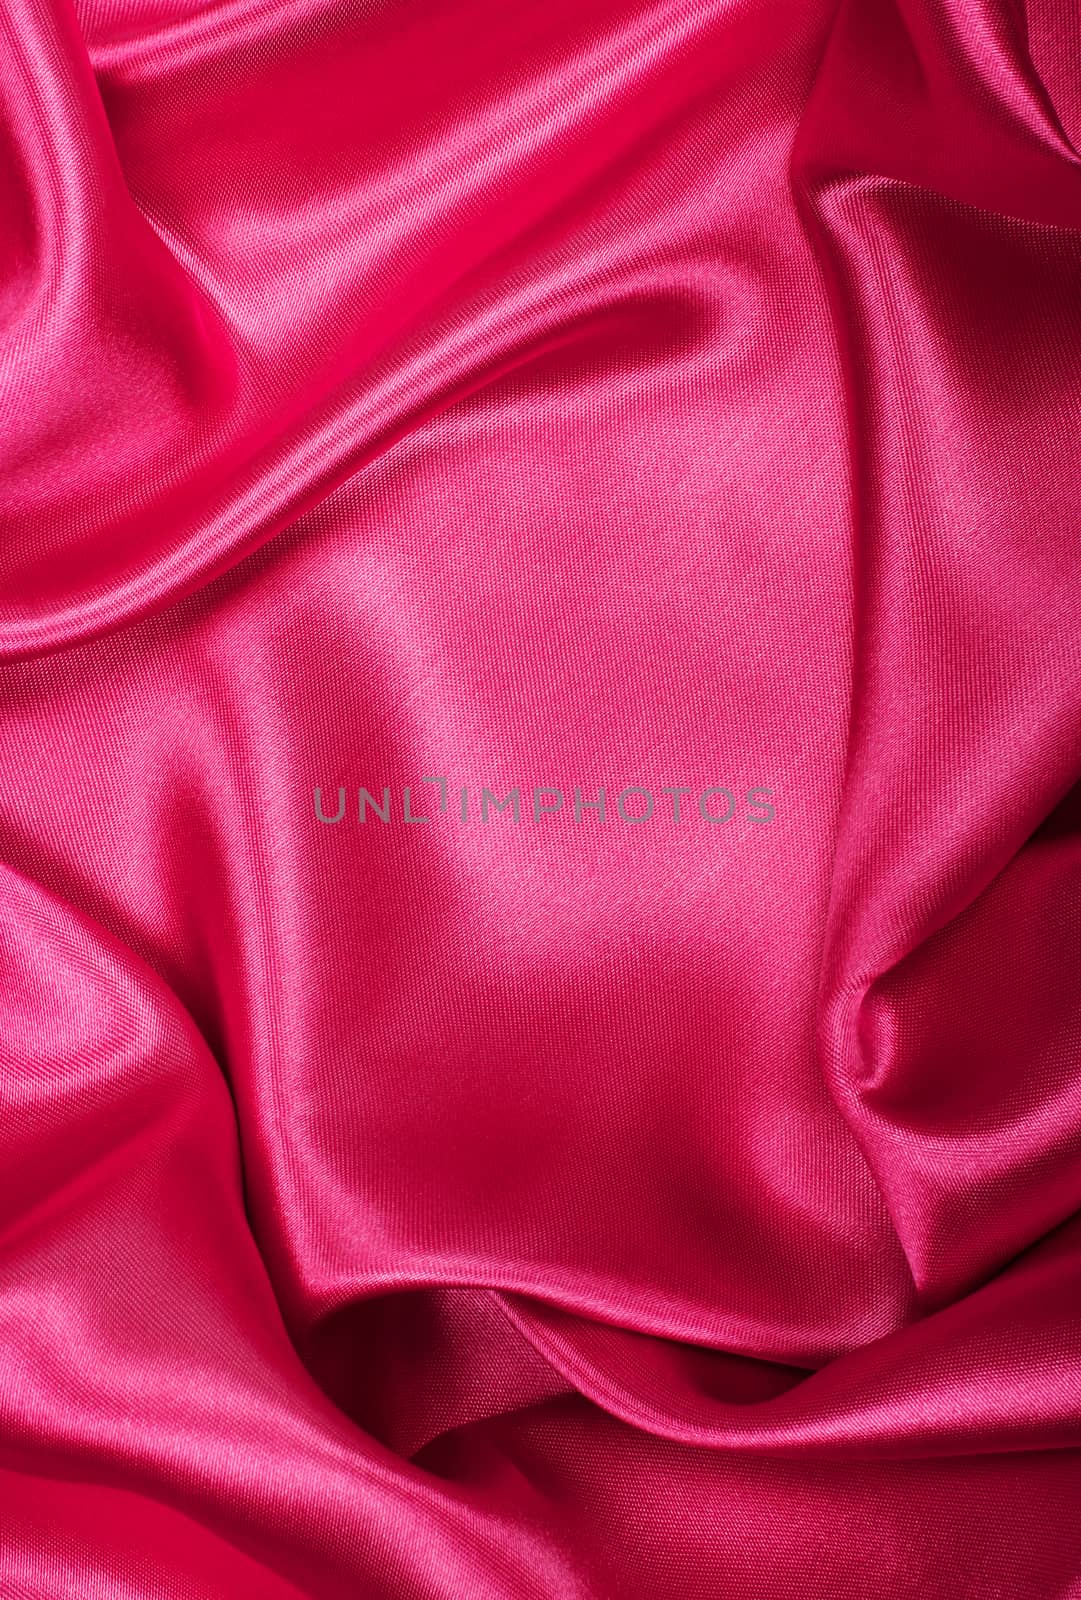 Smooth elegant red silk or satin can use as background 